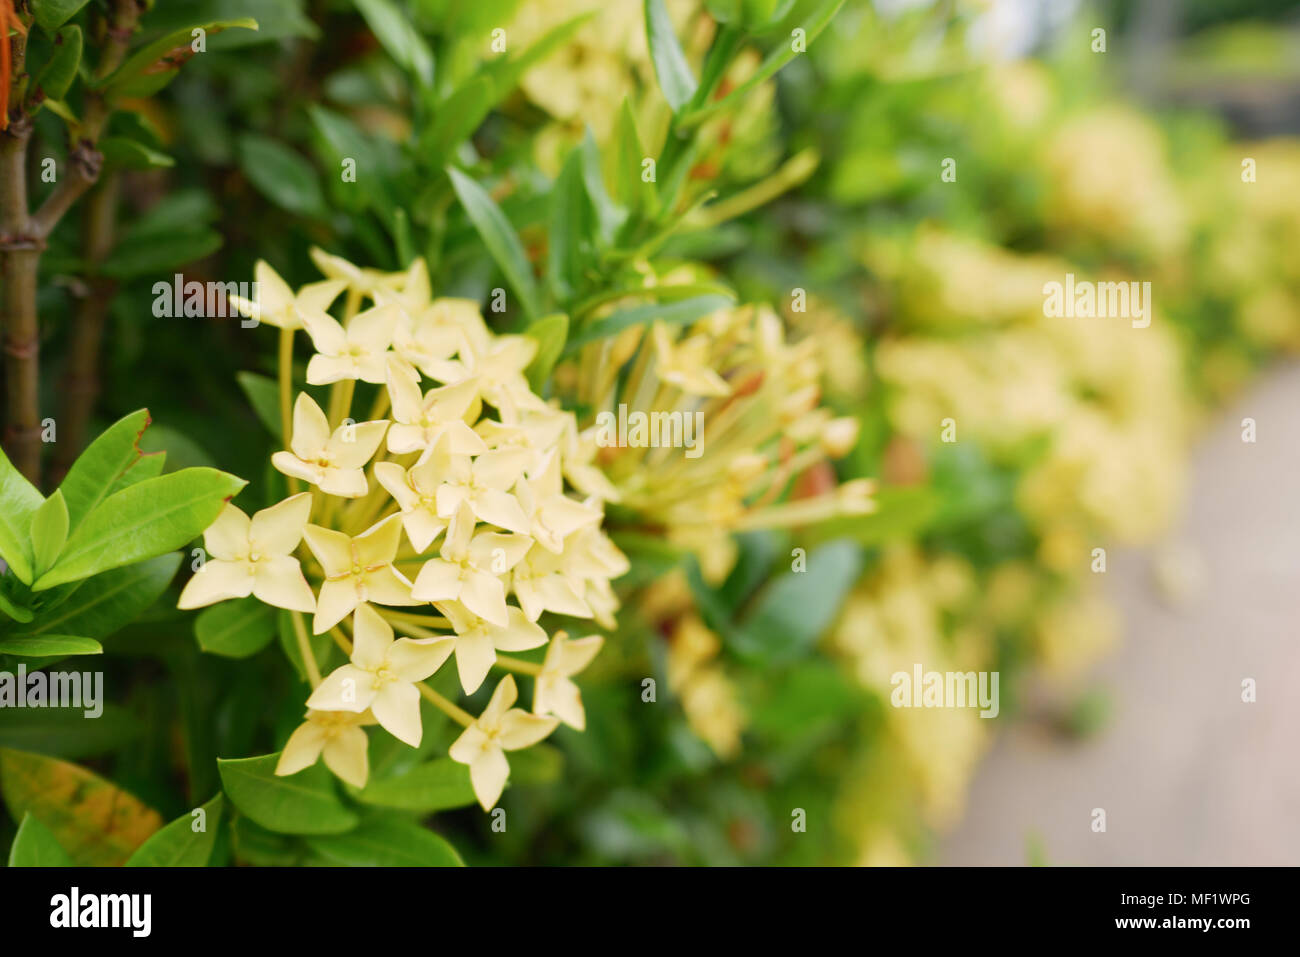 yellow spike flowers and green leaf in outdoor Stock Photo